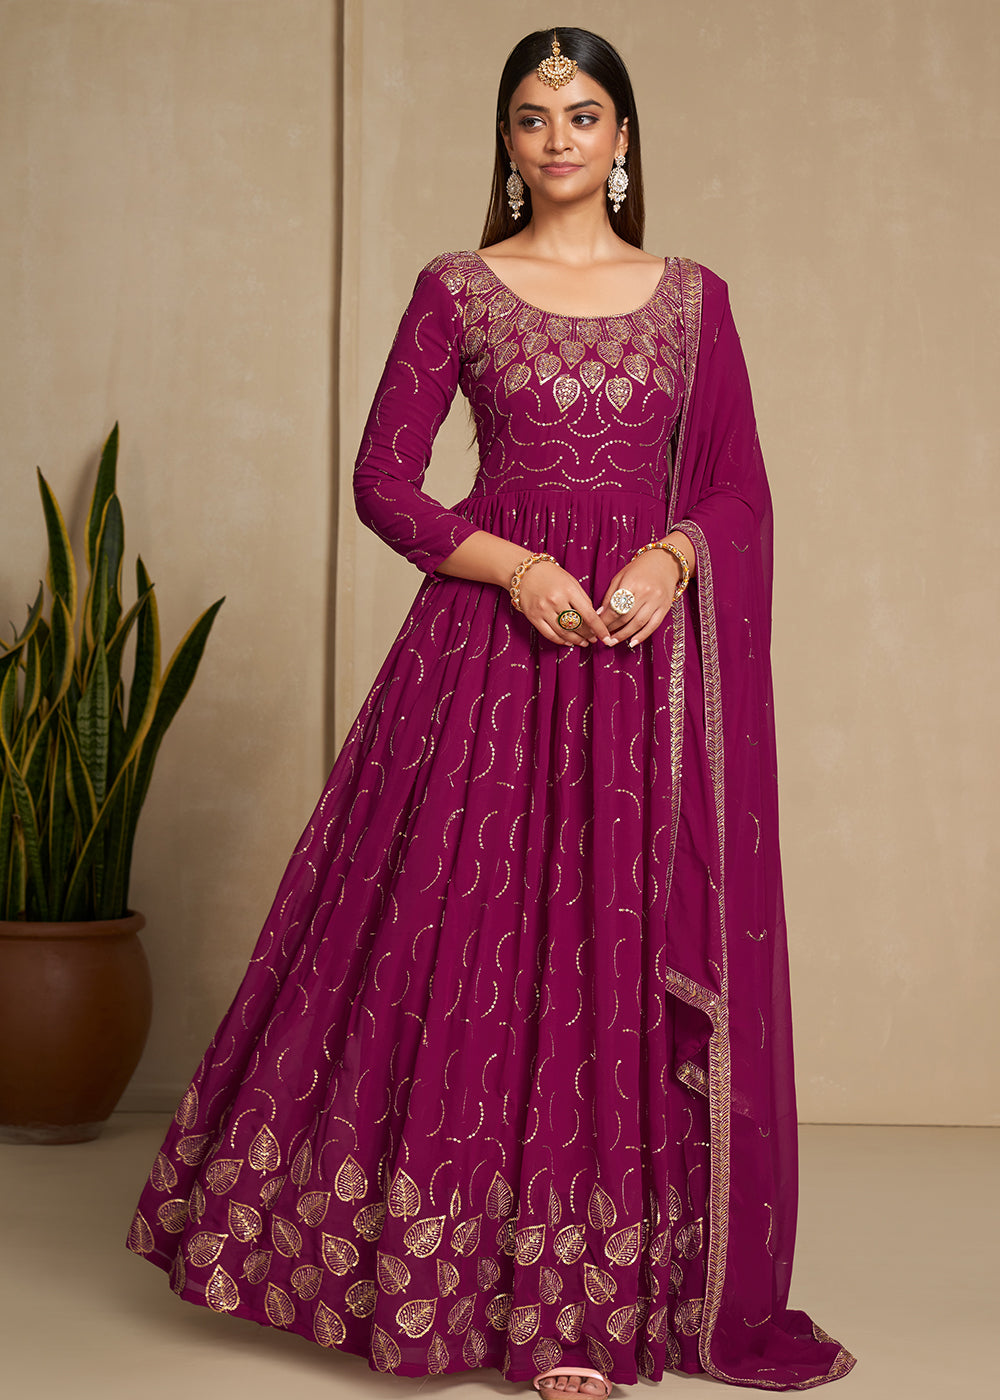 Buy Now Zari & Sequins Embroidered Cherry Pink Anarkali Suit Online in USA, UK, Australia, New Zealand, Canada & Worldwide at Empress Clothing. 